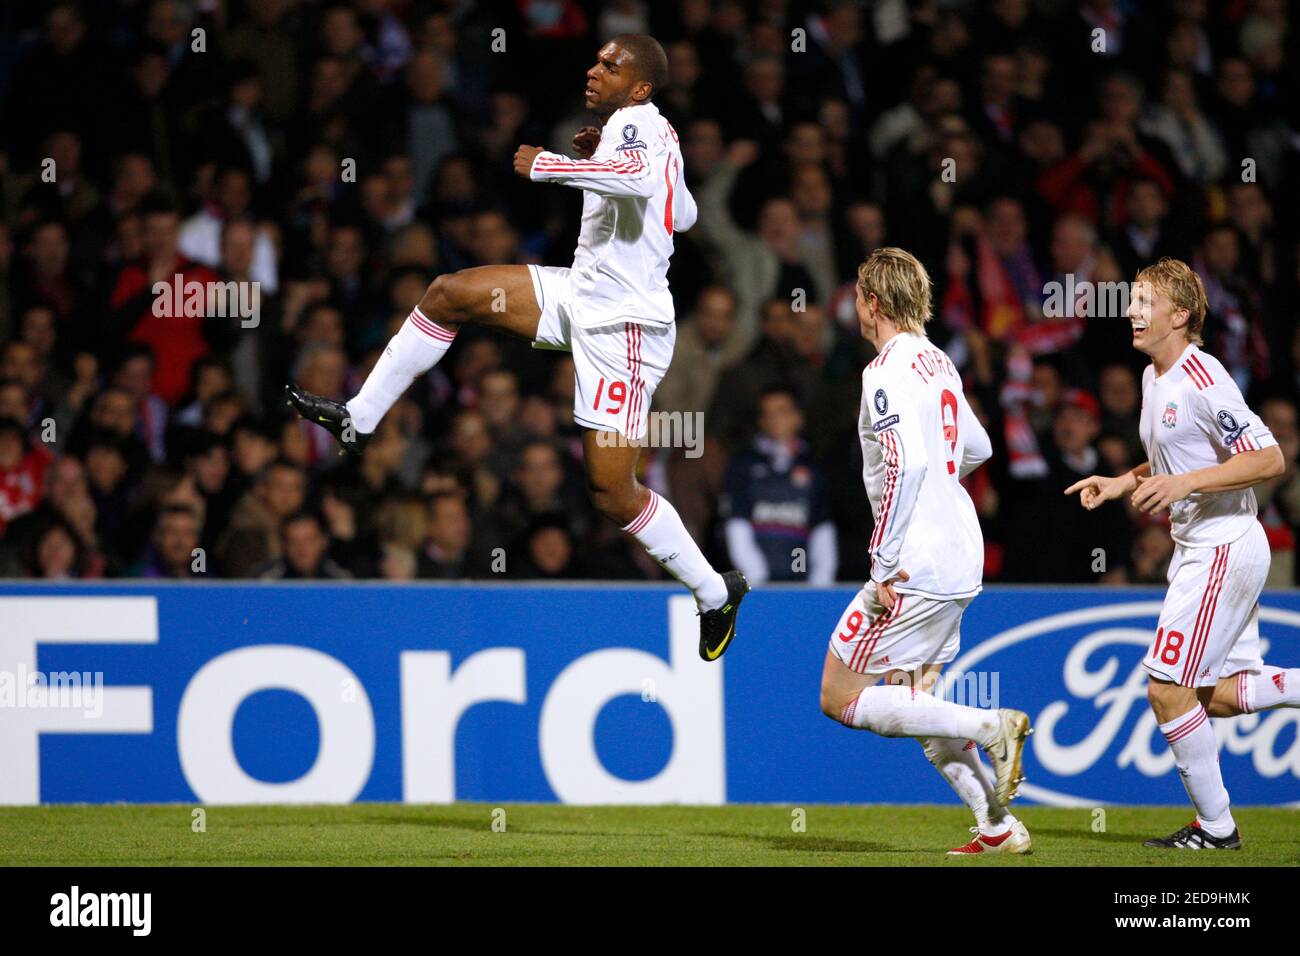 Football - Olympique Lyonnais v Liverpool UEFA Champions League Group Stage  Matchday Four Group E - Gerland Stadium, Lyon, France - 09/10 - 4/11/09  Liverpool's Ryan Babel (L) celebrates scoring their first